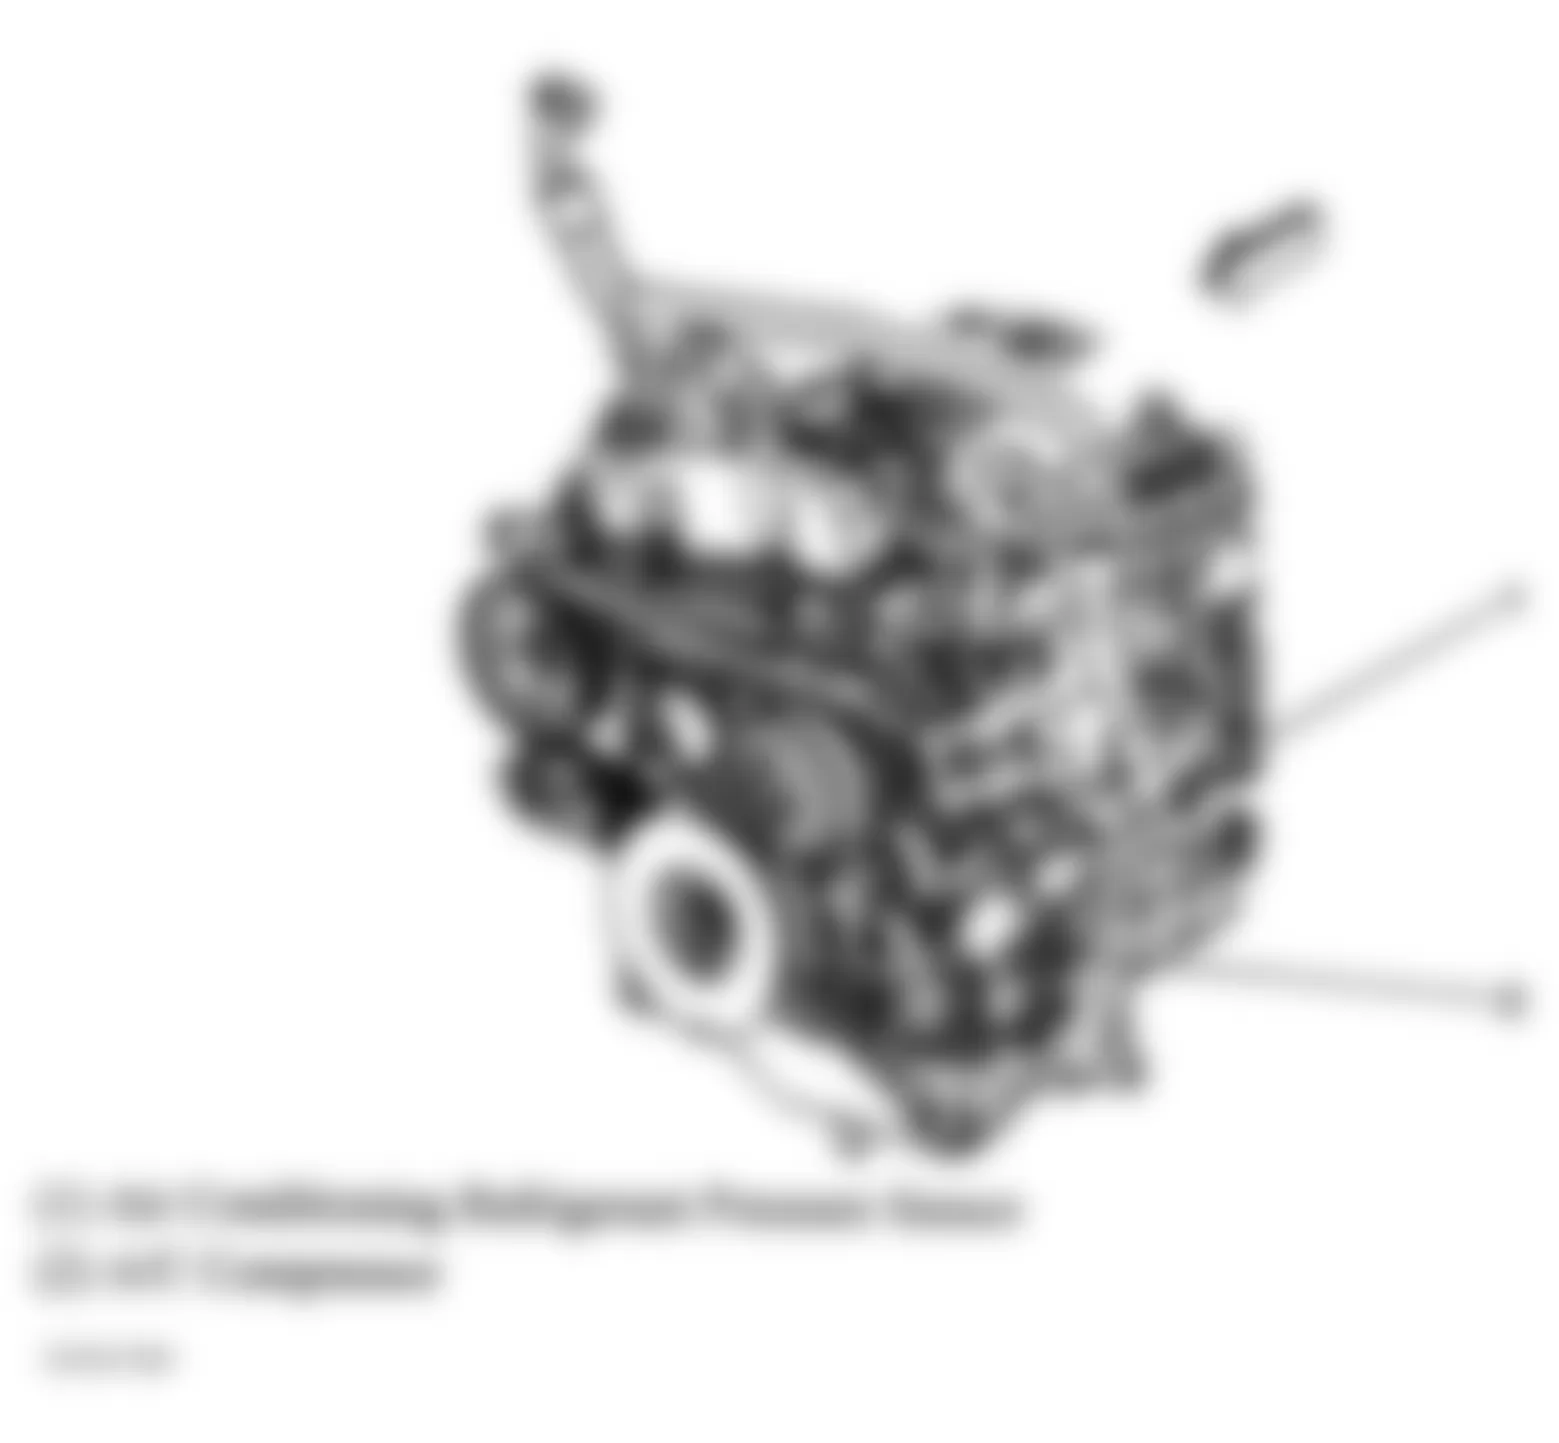 GMC Envoy 2005 - Component Locations -  Front Of Engine (4.2L)